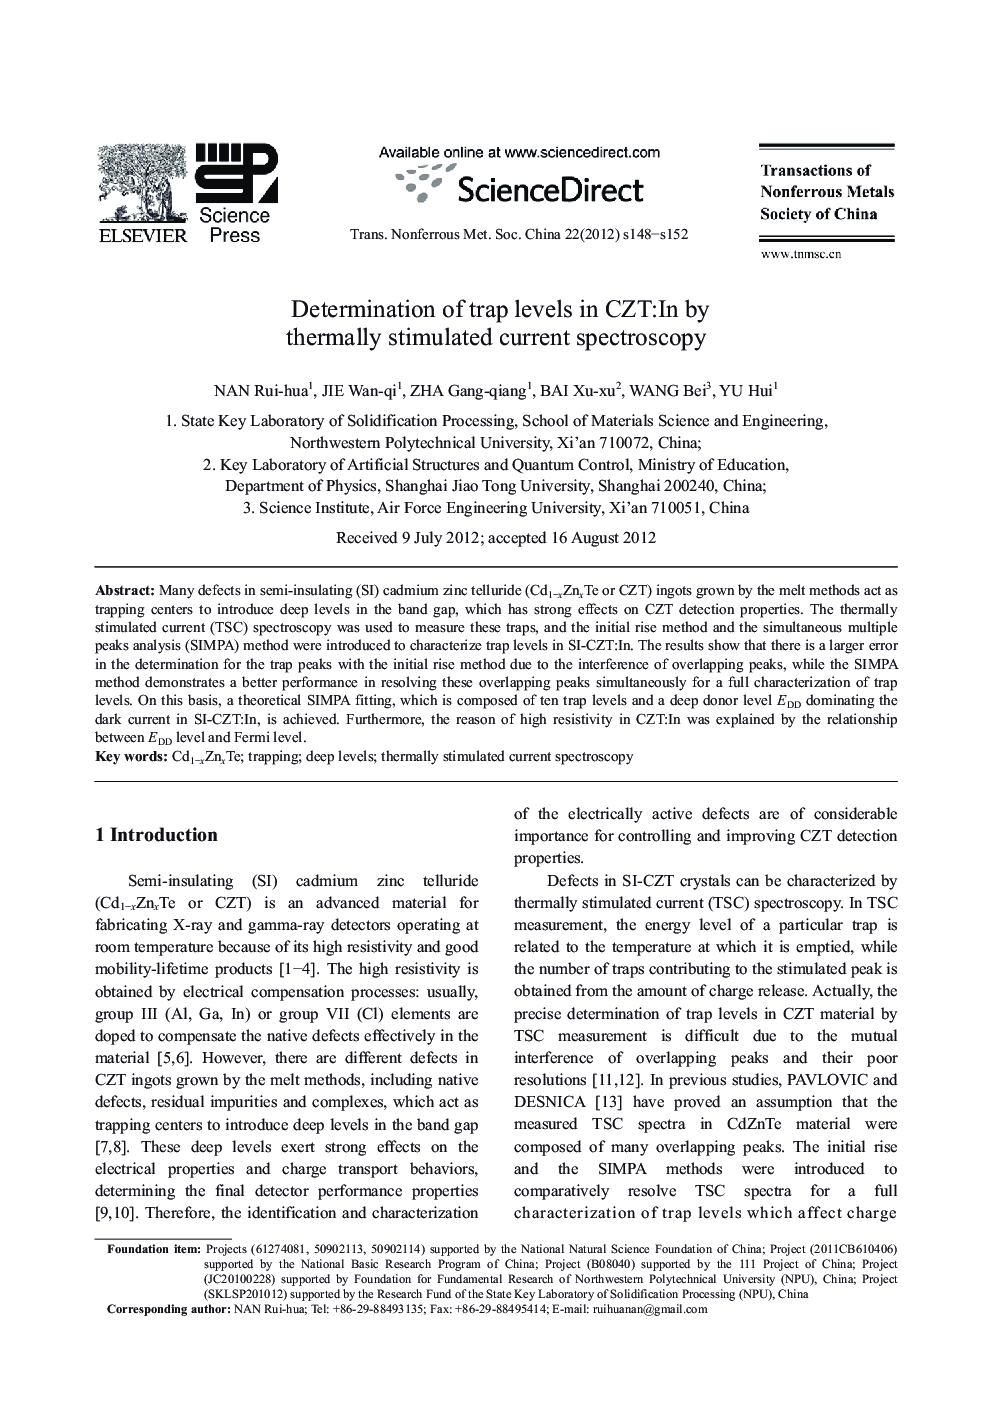 Determination of trap levels in CZT:In by thermally stimulated current spectroscopy 